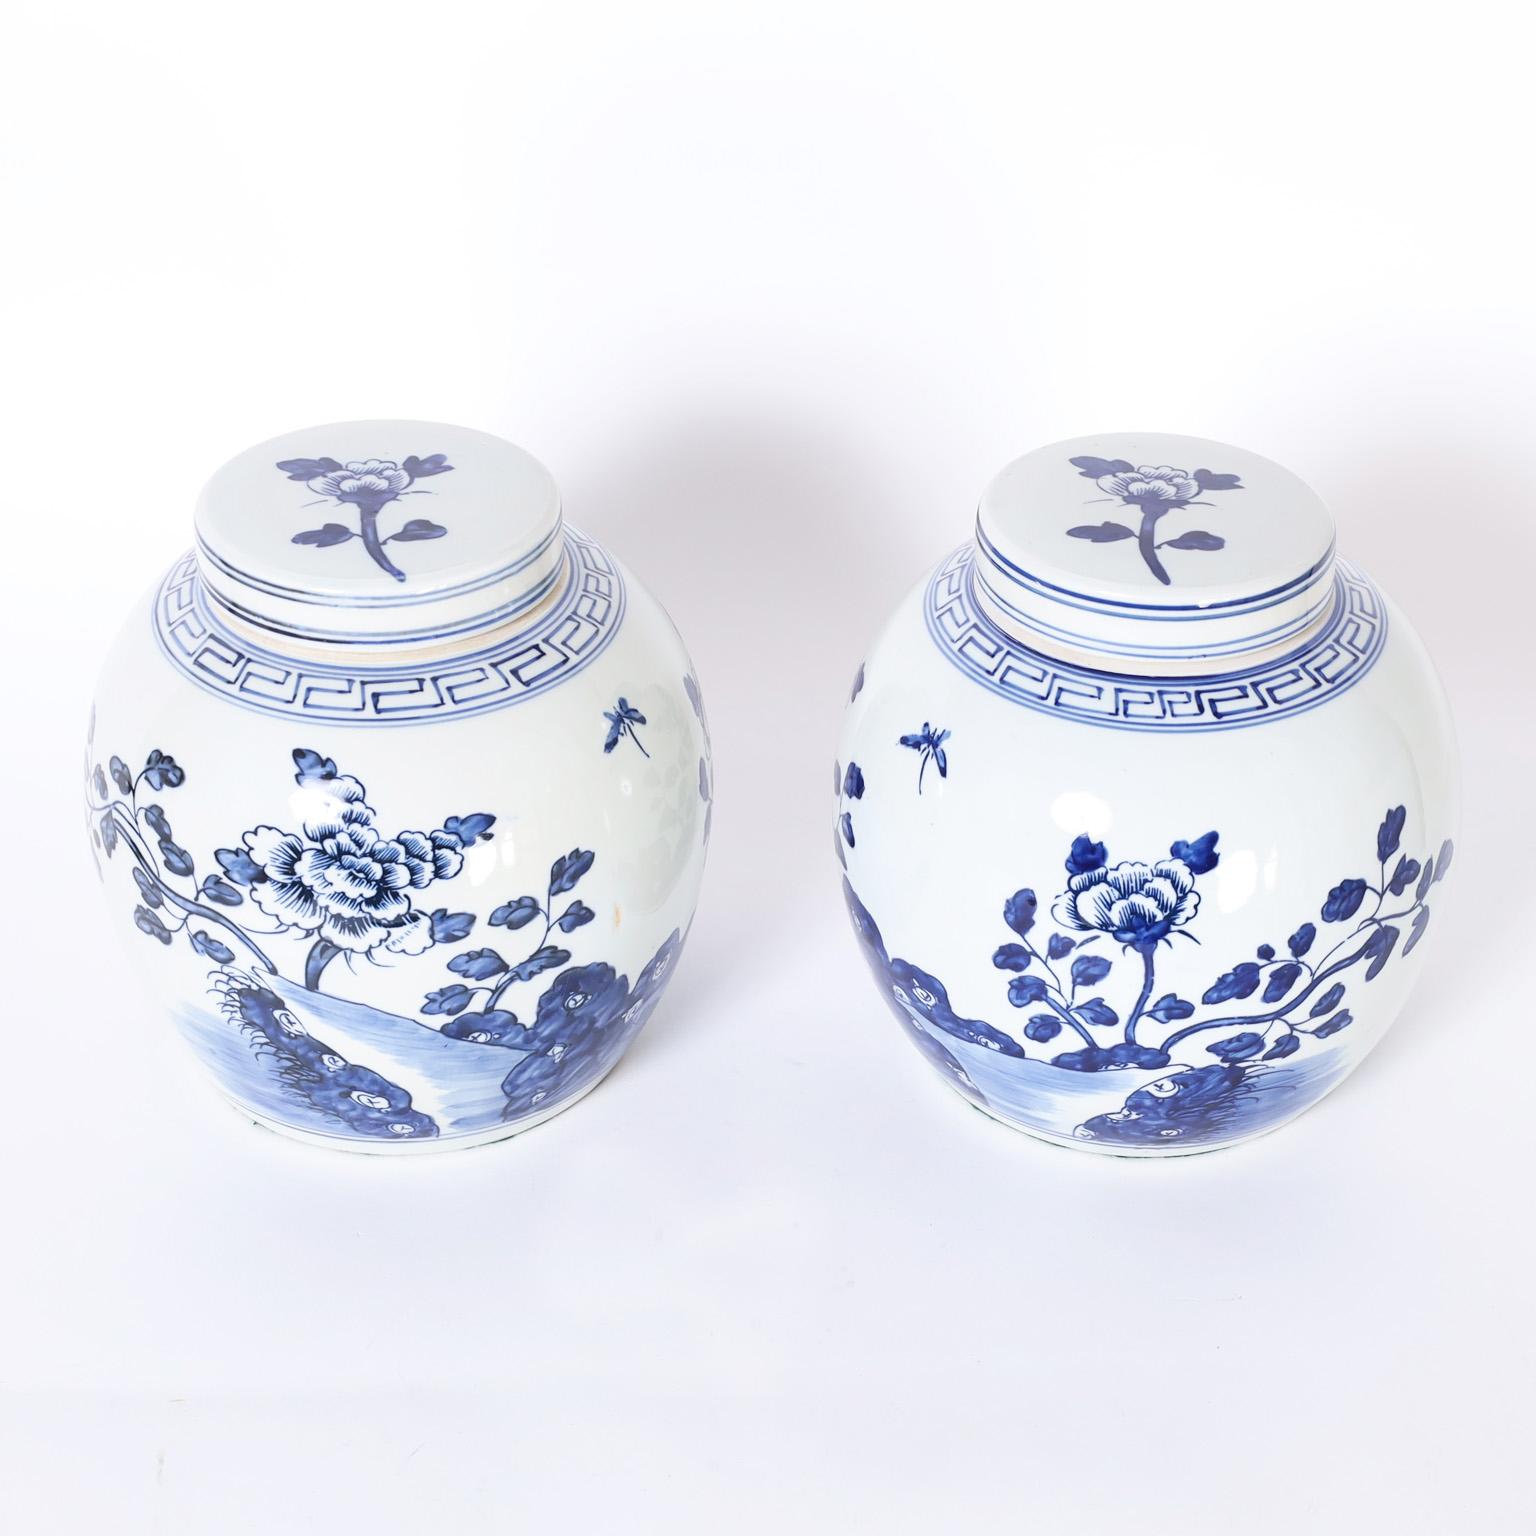 Chinese blue and white porcelain jars with classic form hand decorated with flowers and leaves.